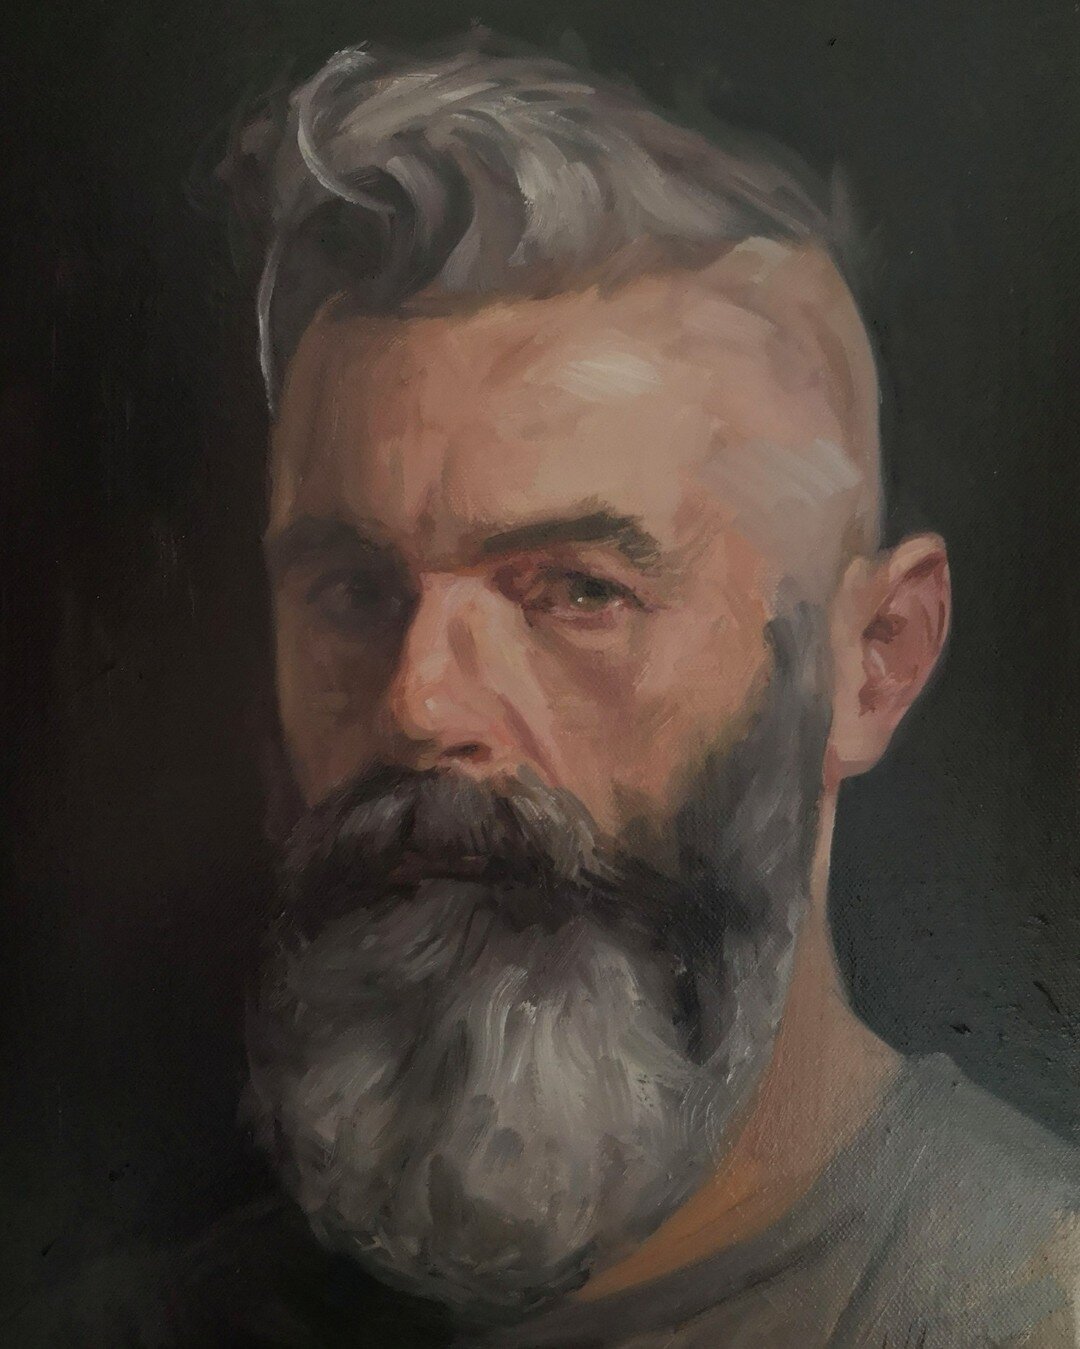 Adam Portraiture Award Finalist Stephen Martyn Welch 'one night, one mirror and a cpl of bourbons' 2020

 &quot;I feel a portrait needs a connection and an understanding of the sitter. I know EVERYTHING about this sitter because it's me. I remember e